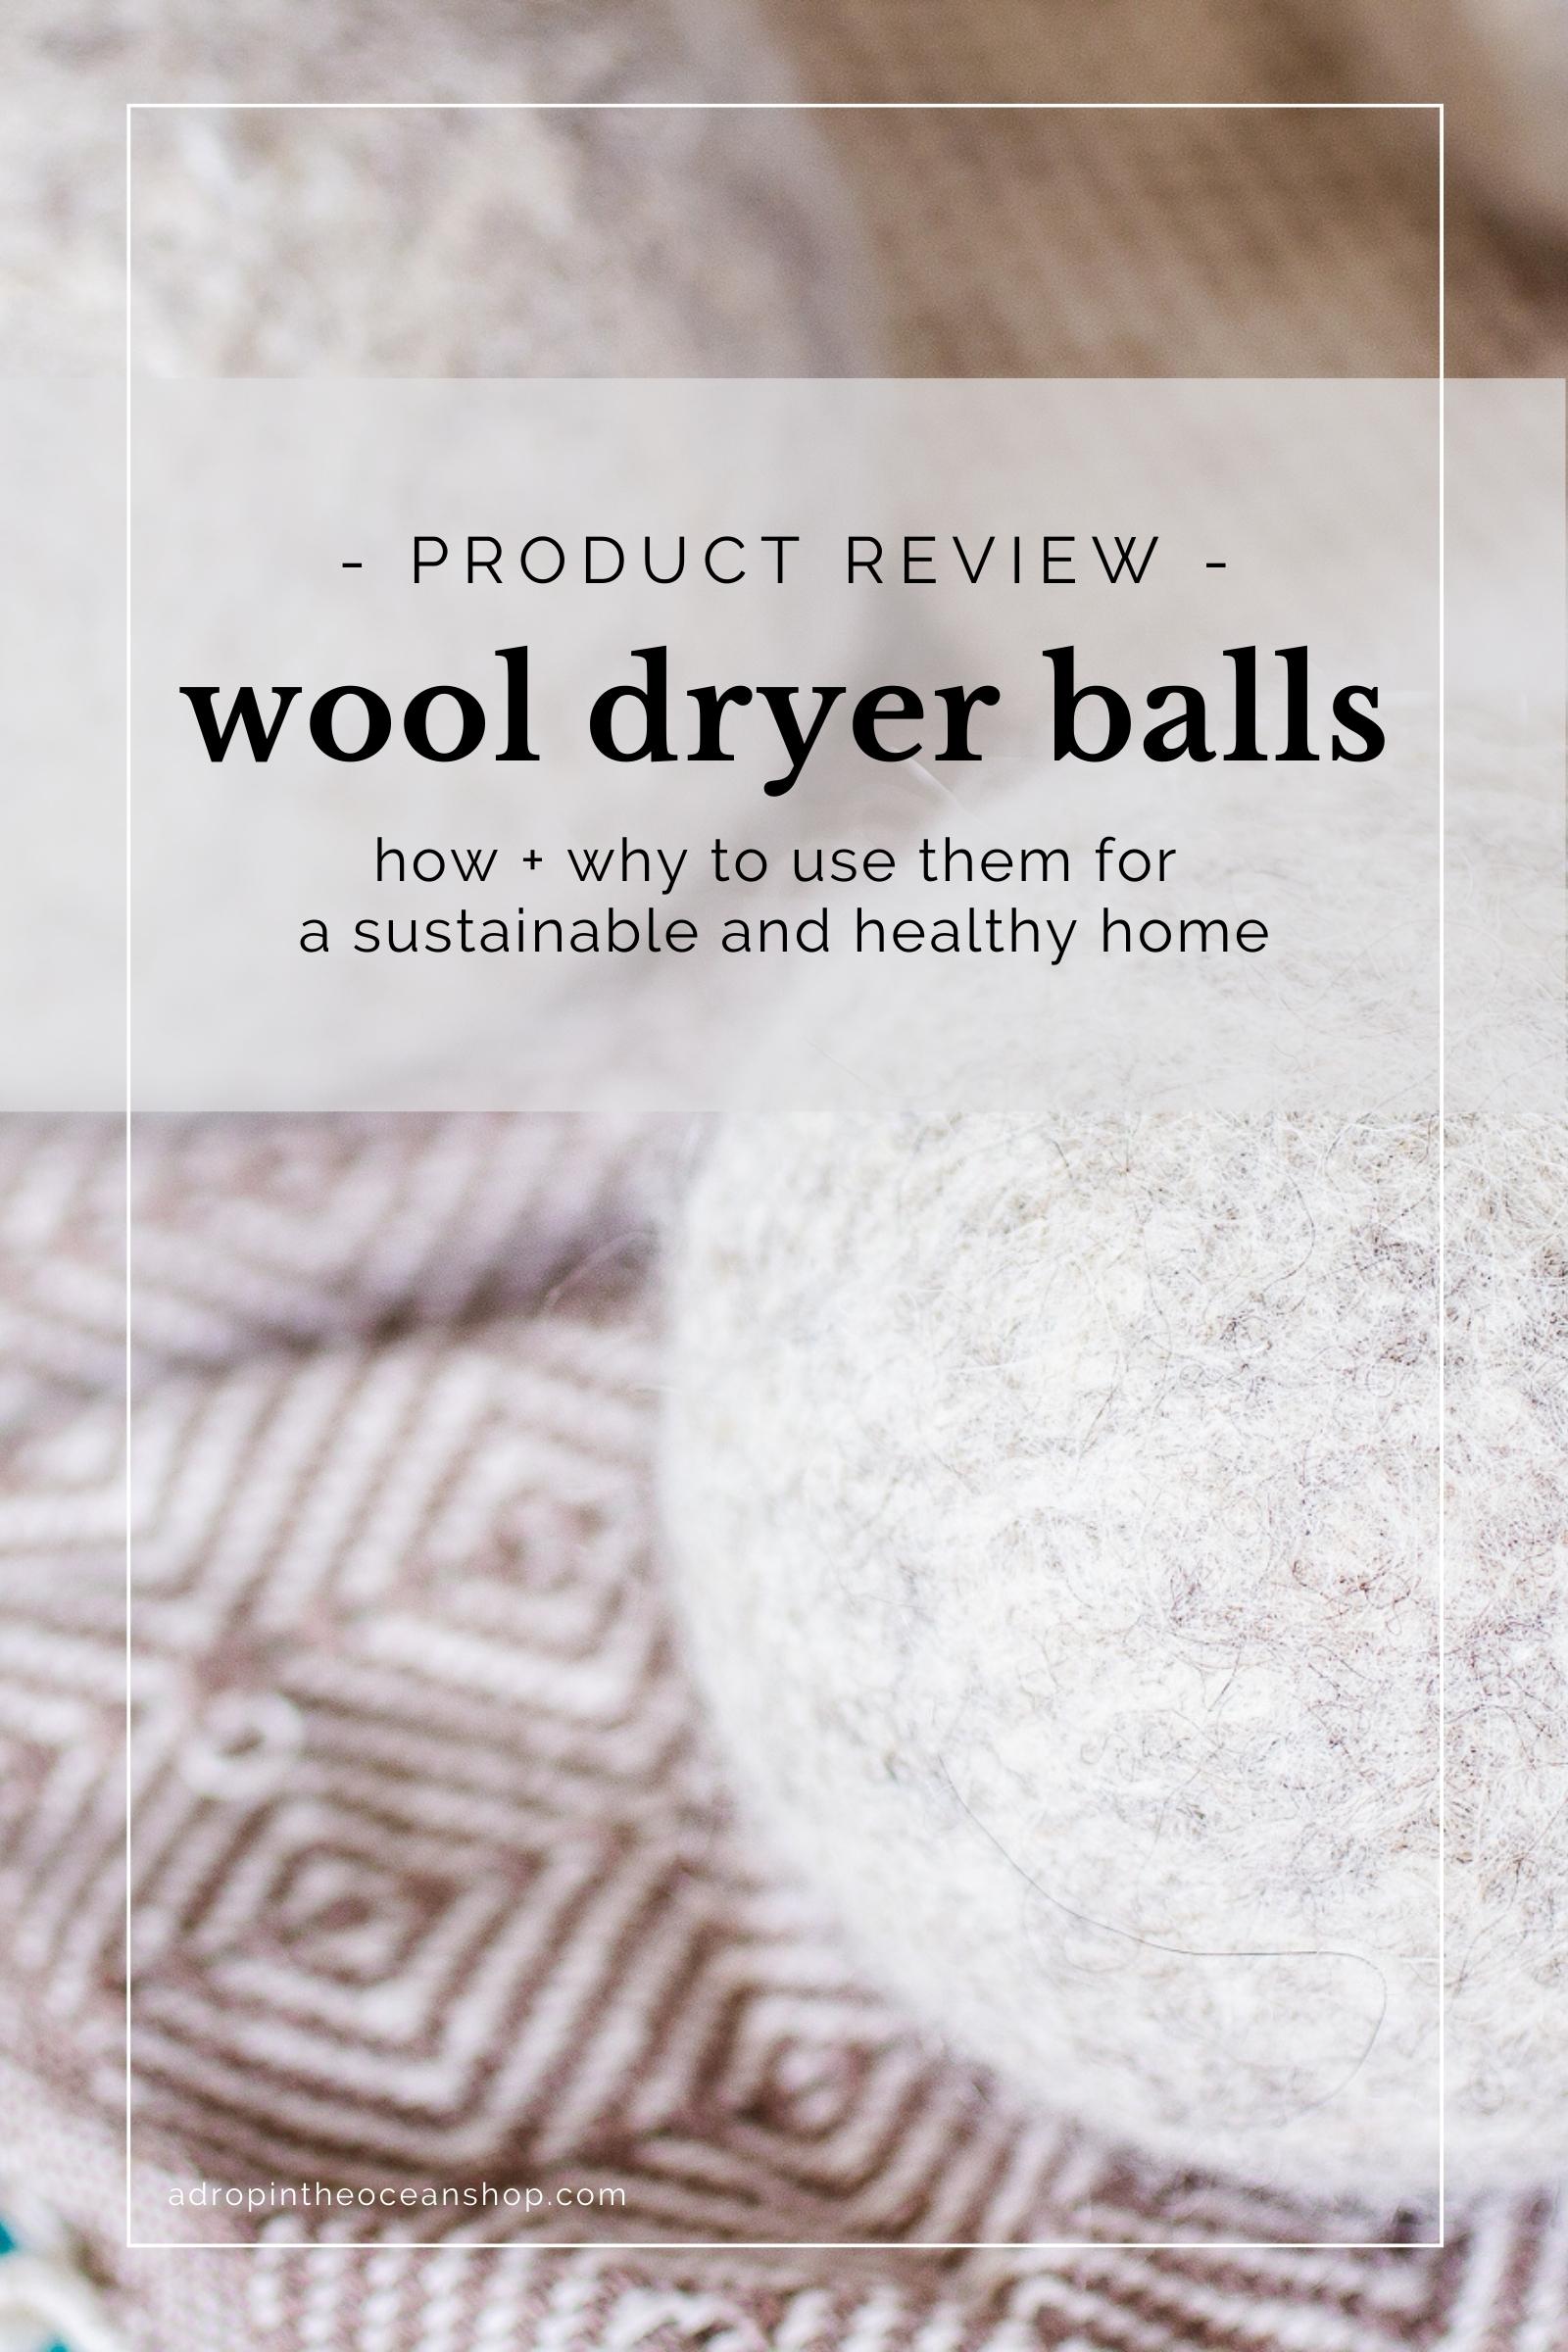 A Drop in the Ocean Zero Waste Blog: Everything you need to know about wool dryer balls